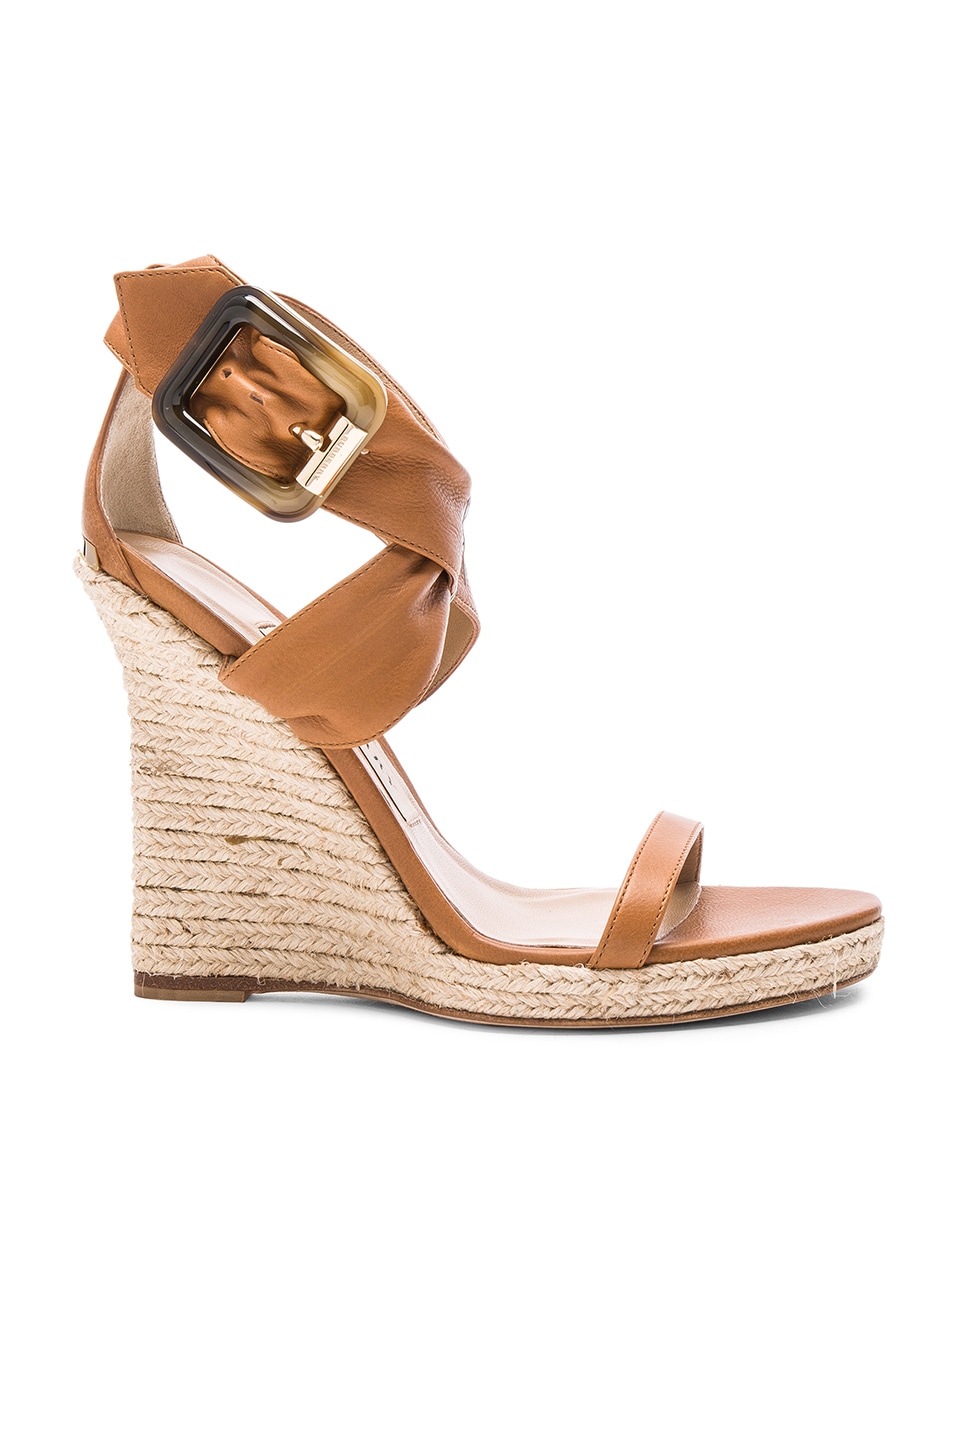 Image 1 of Burberry London Leather Catsbrook Espadrilles in Camel